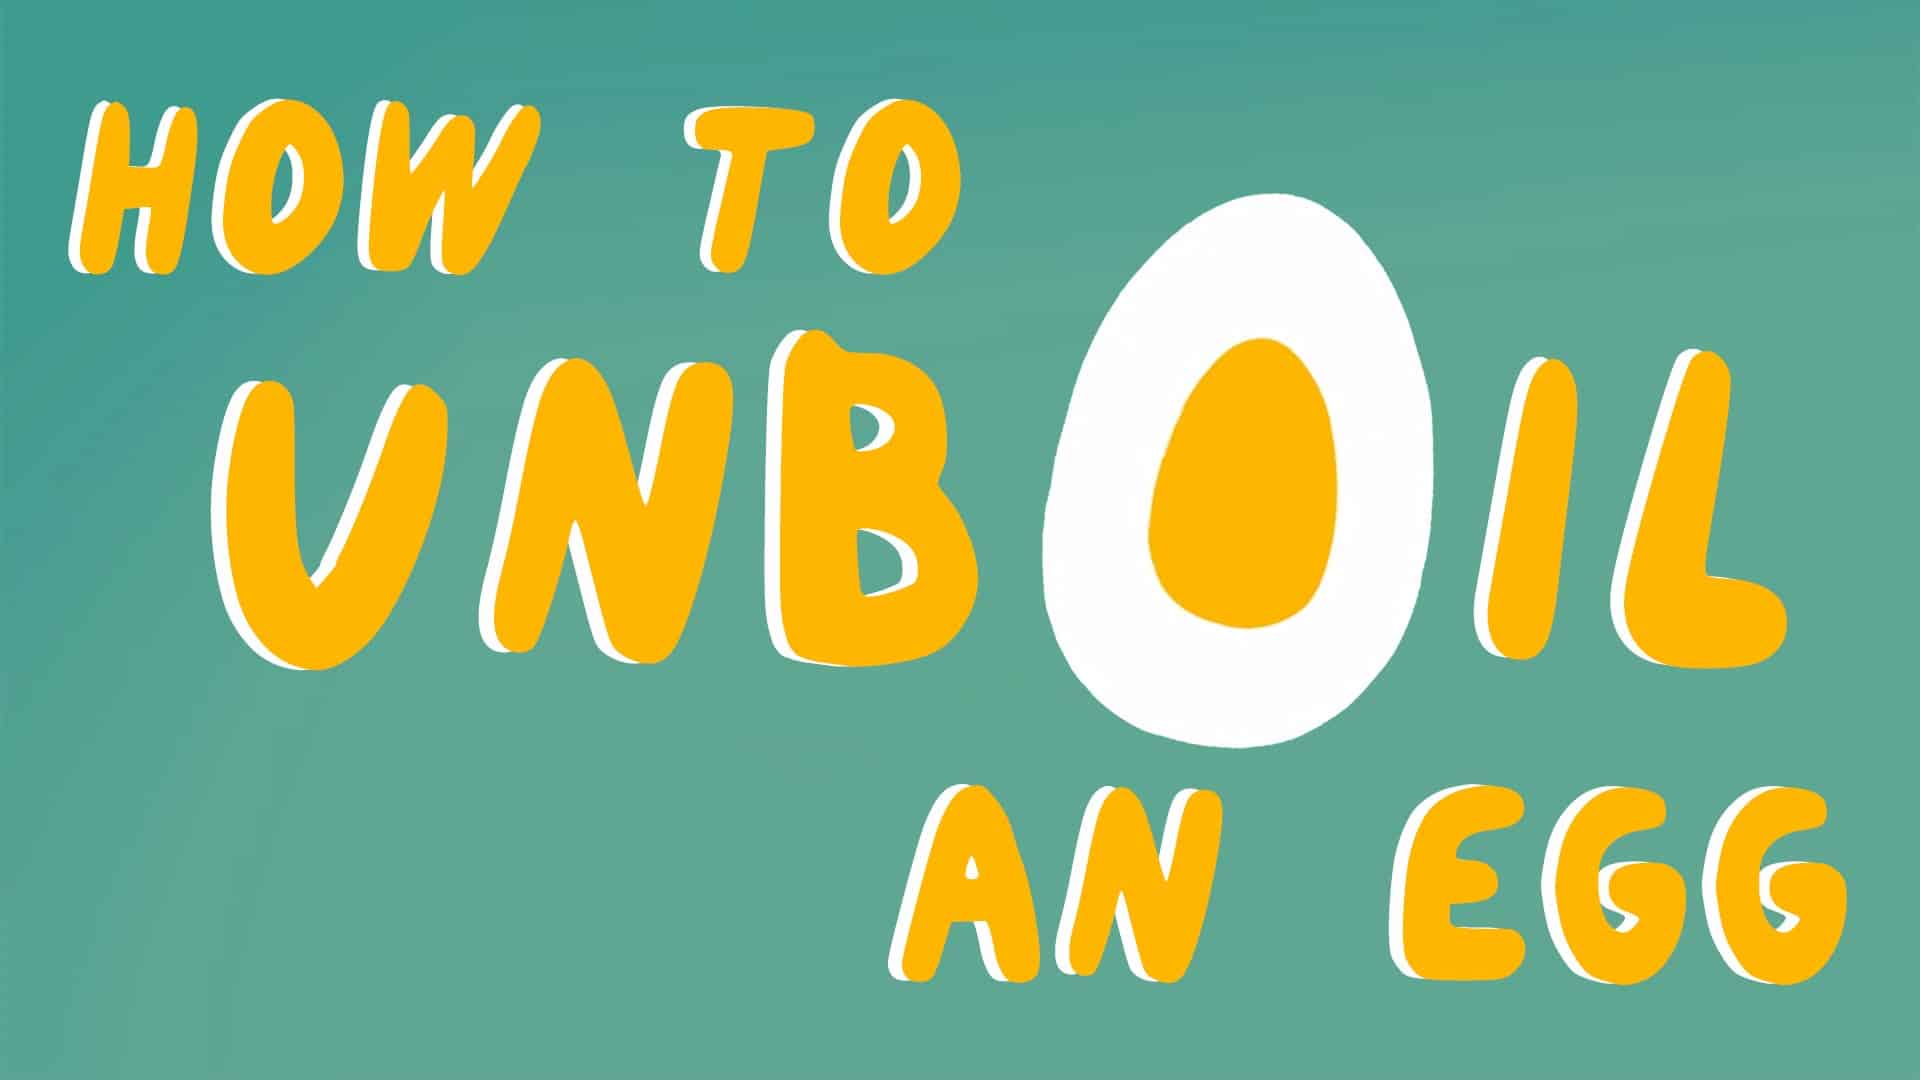 How to unboil an Egg